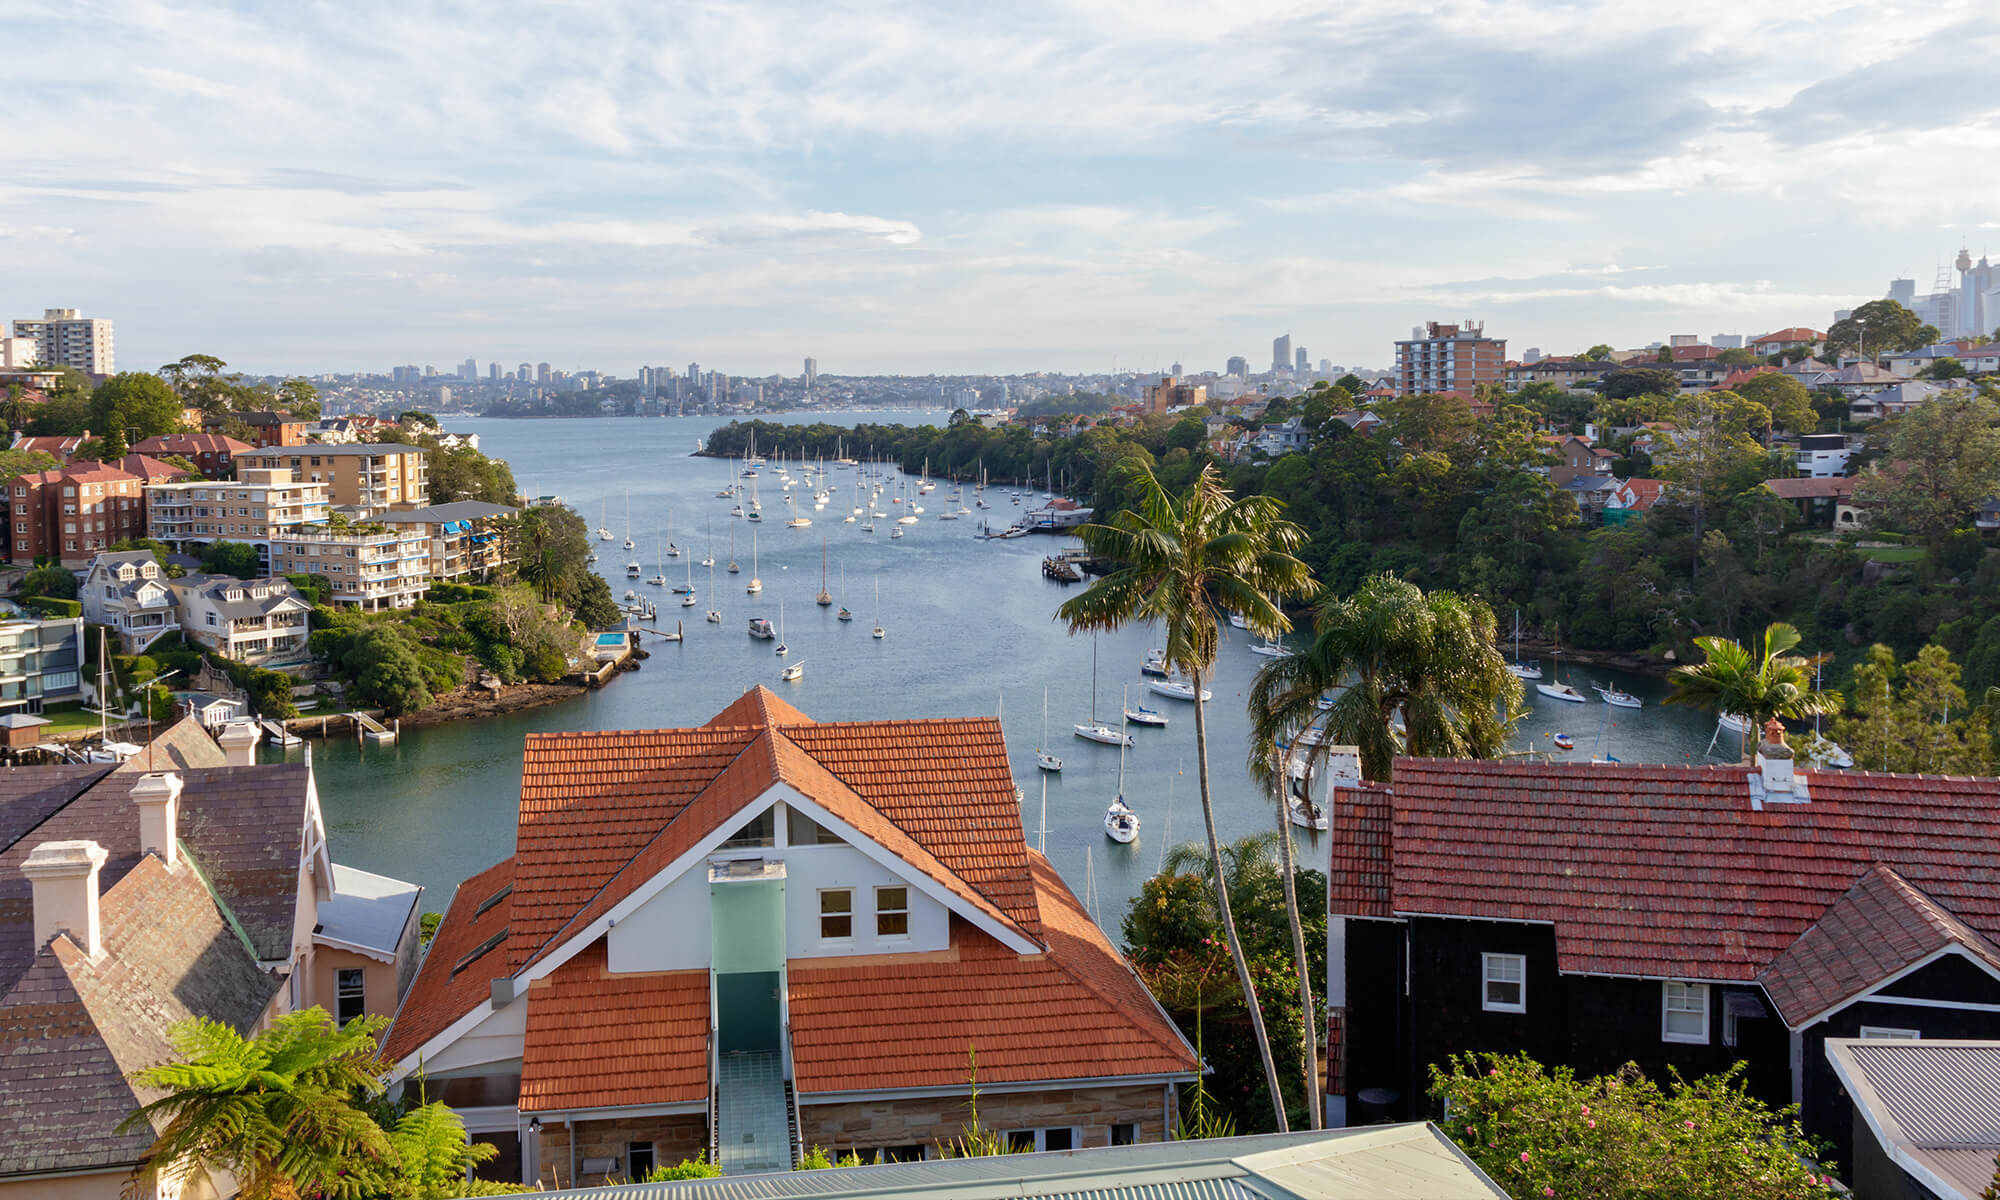 Overlooking houses and apartments near the harbour in Mosman, NSW LGA